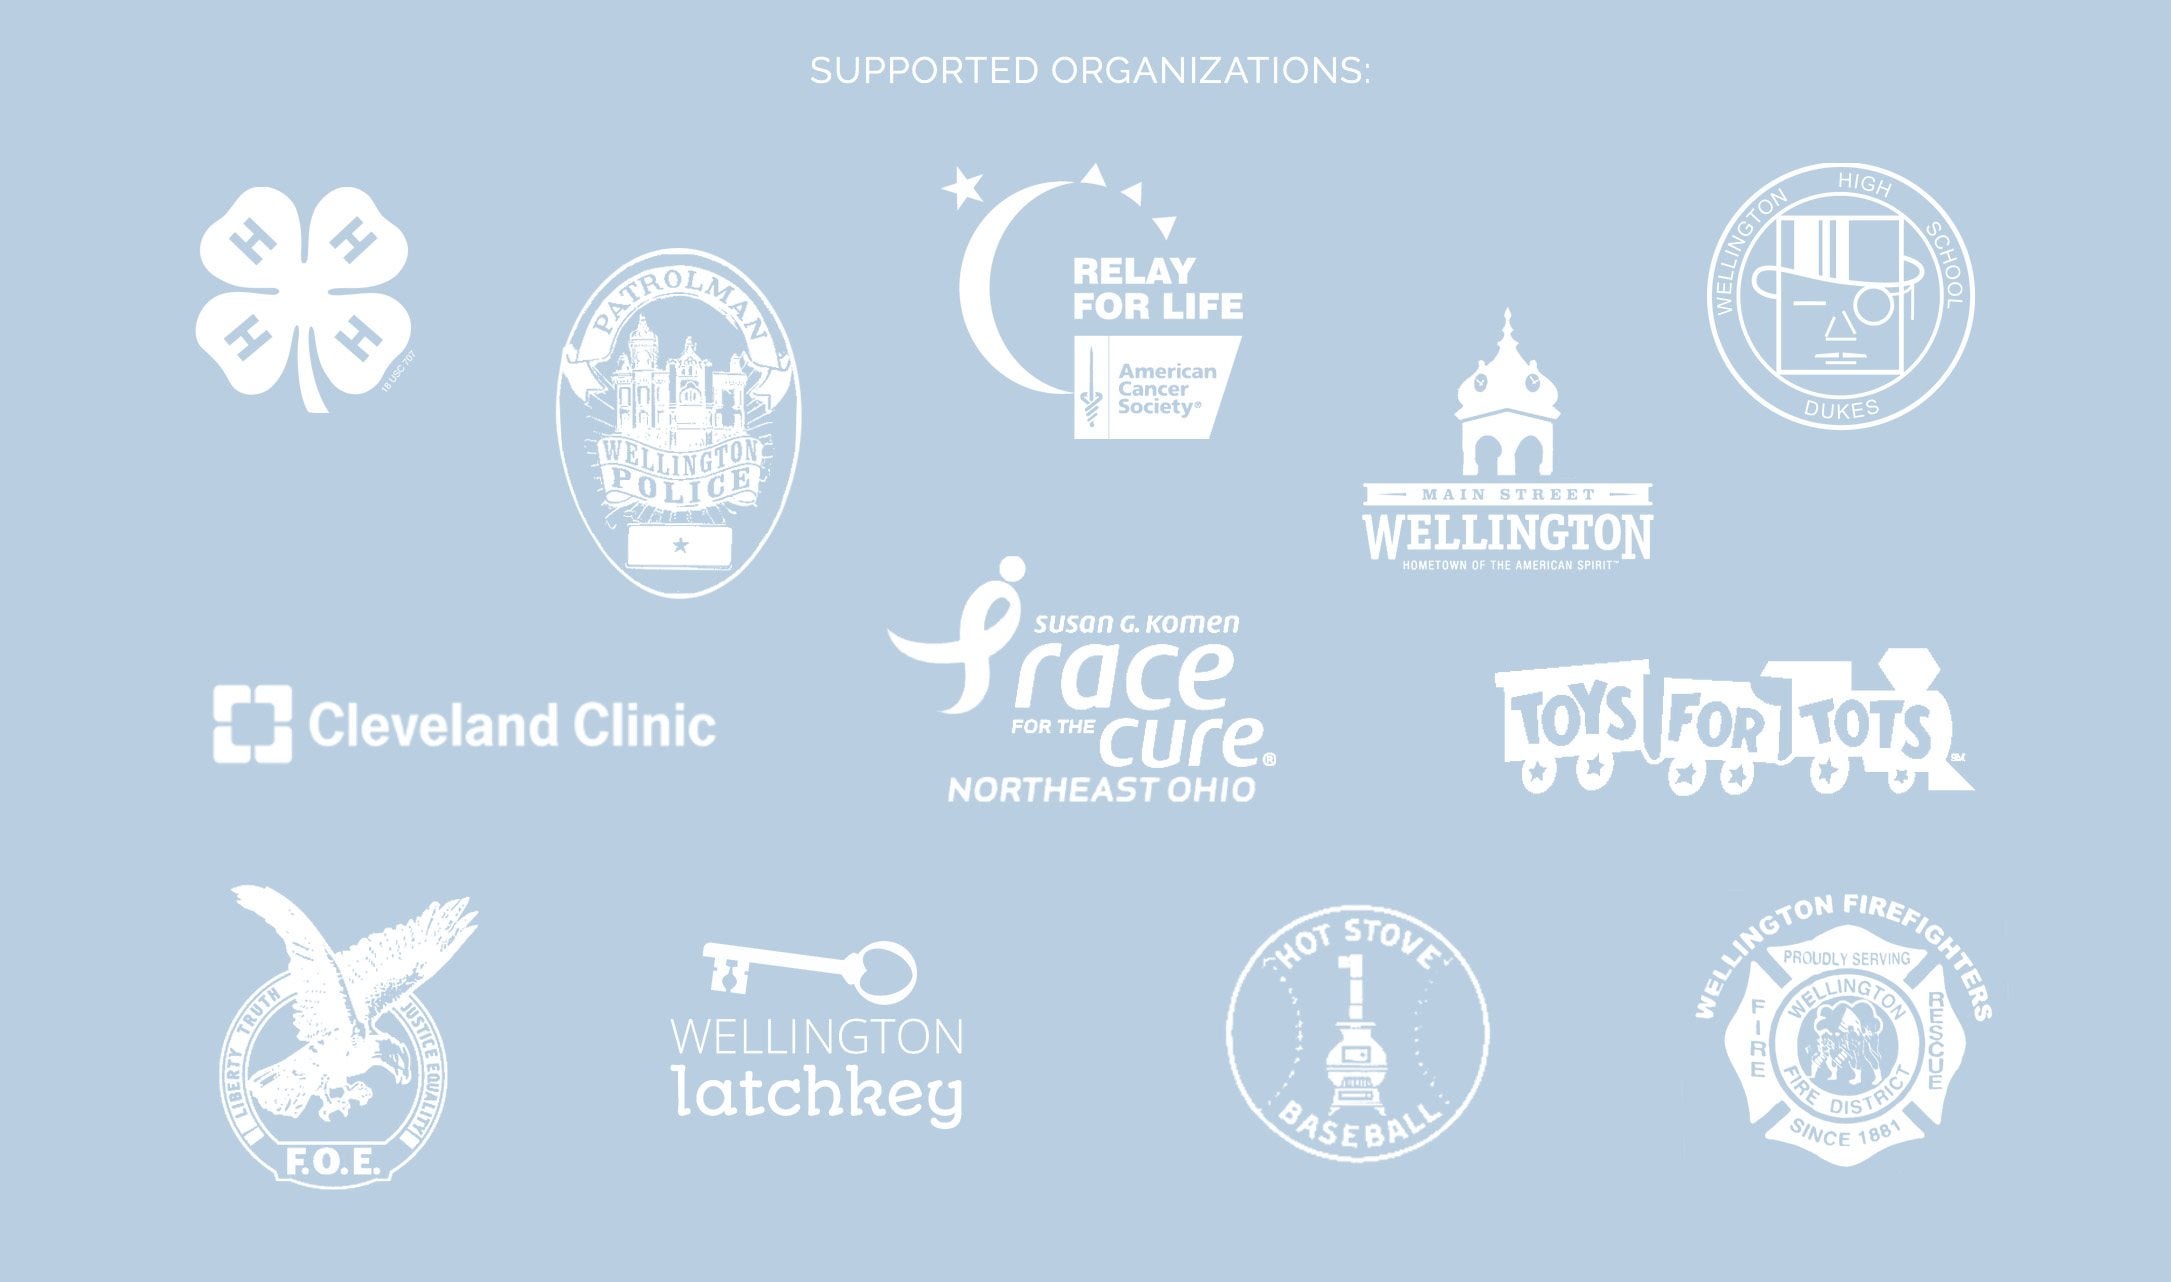 Previously Supported Organizations